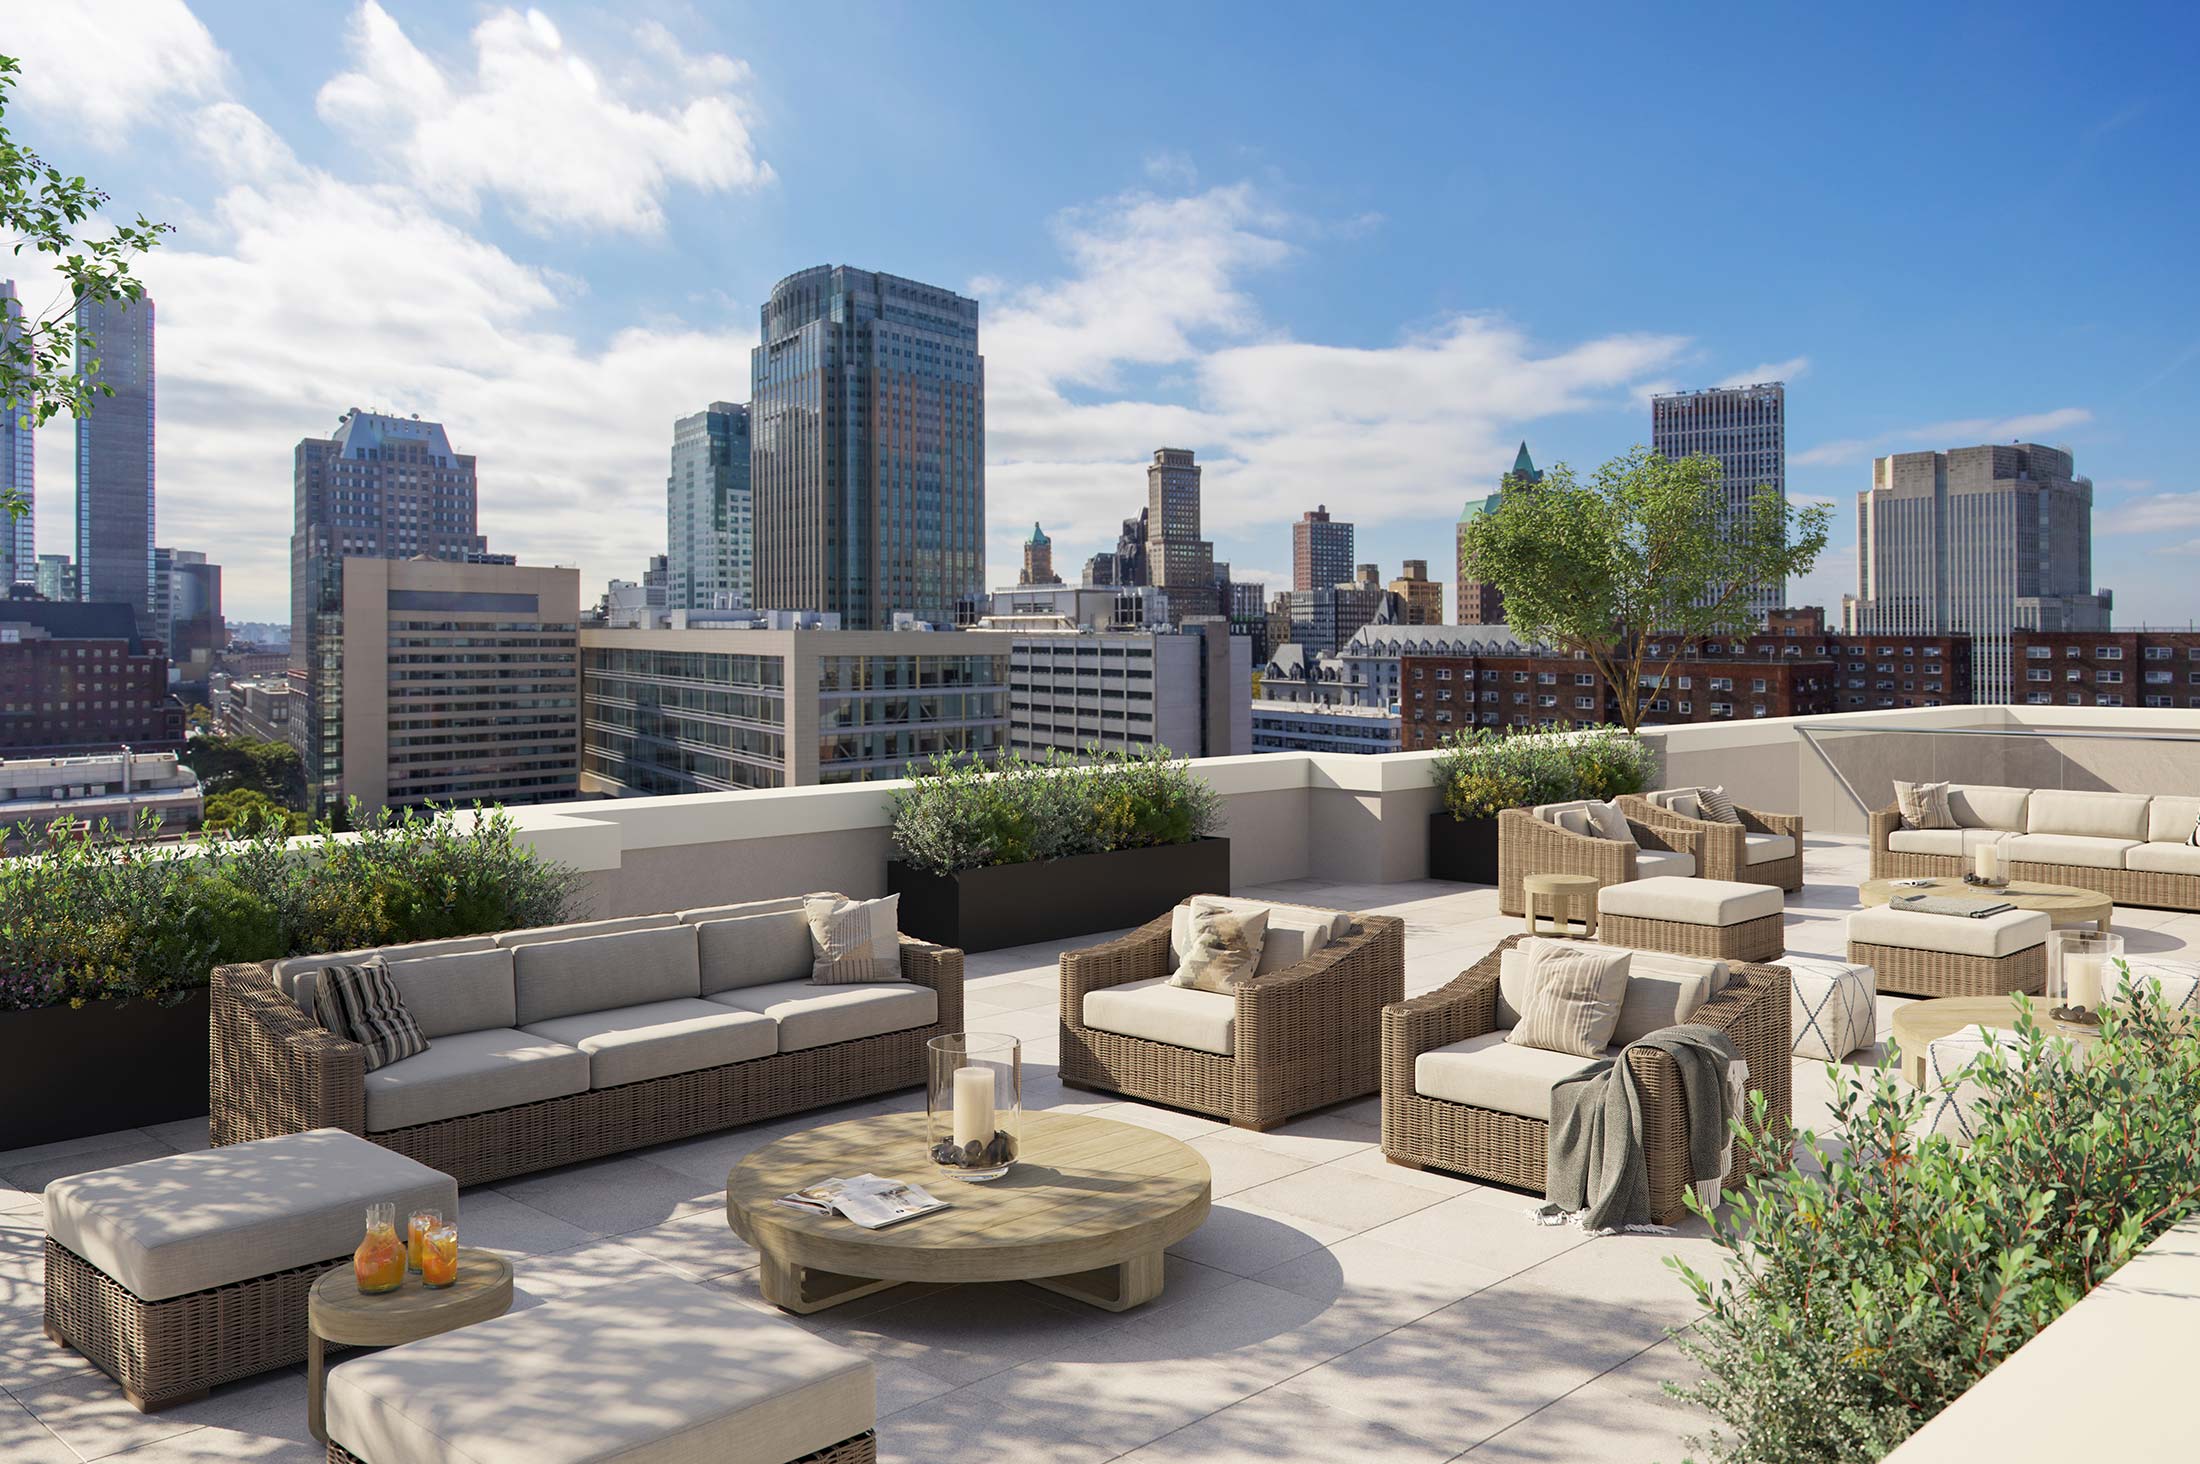 The landscaped roof terrace at 22 Chapel with skyline views of Brooklyn